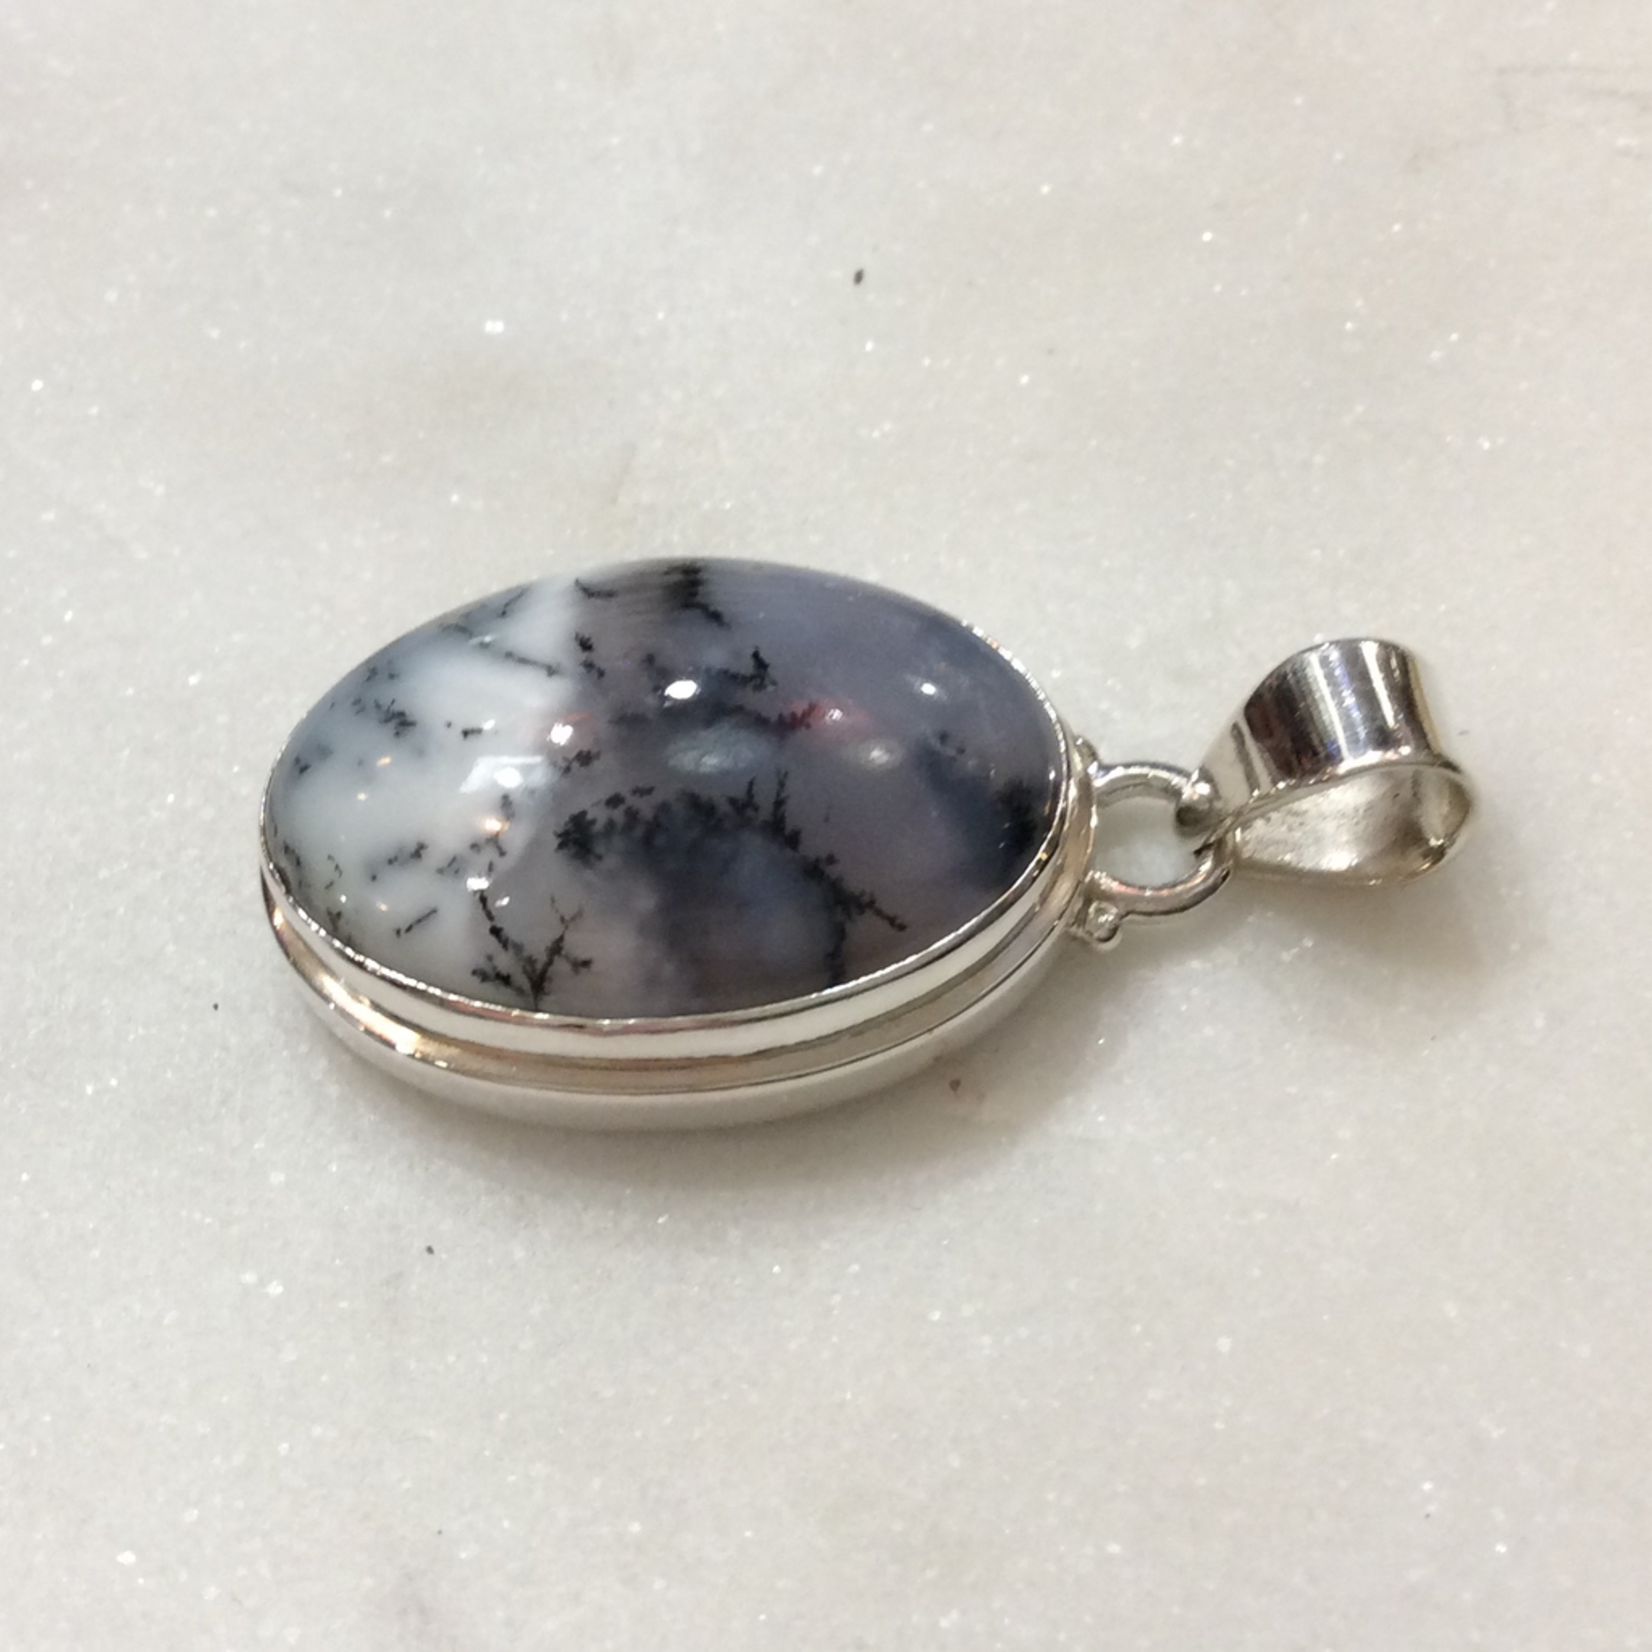 Maharaja Arts Palace Dendritic Agate Large Oval Pendant - Sterling Silver